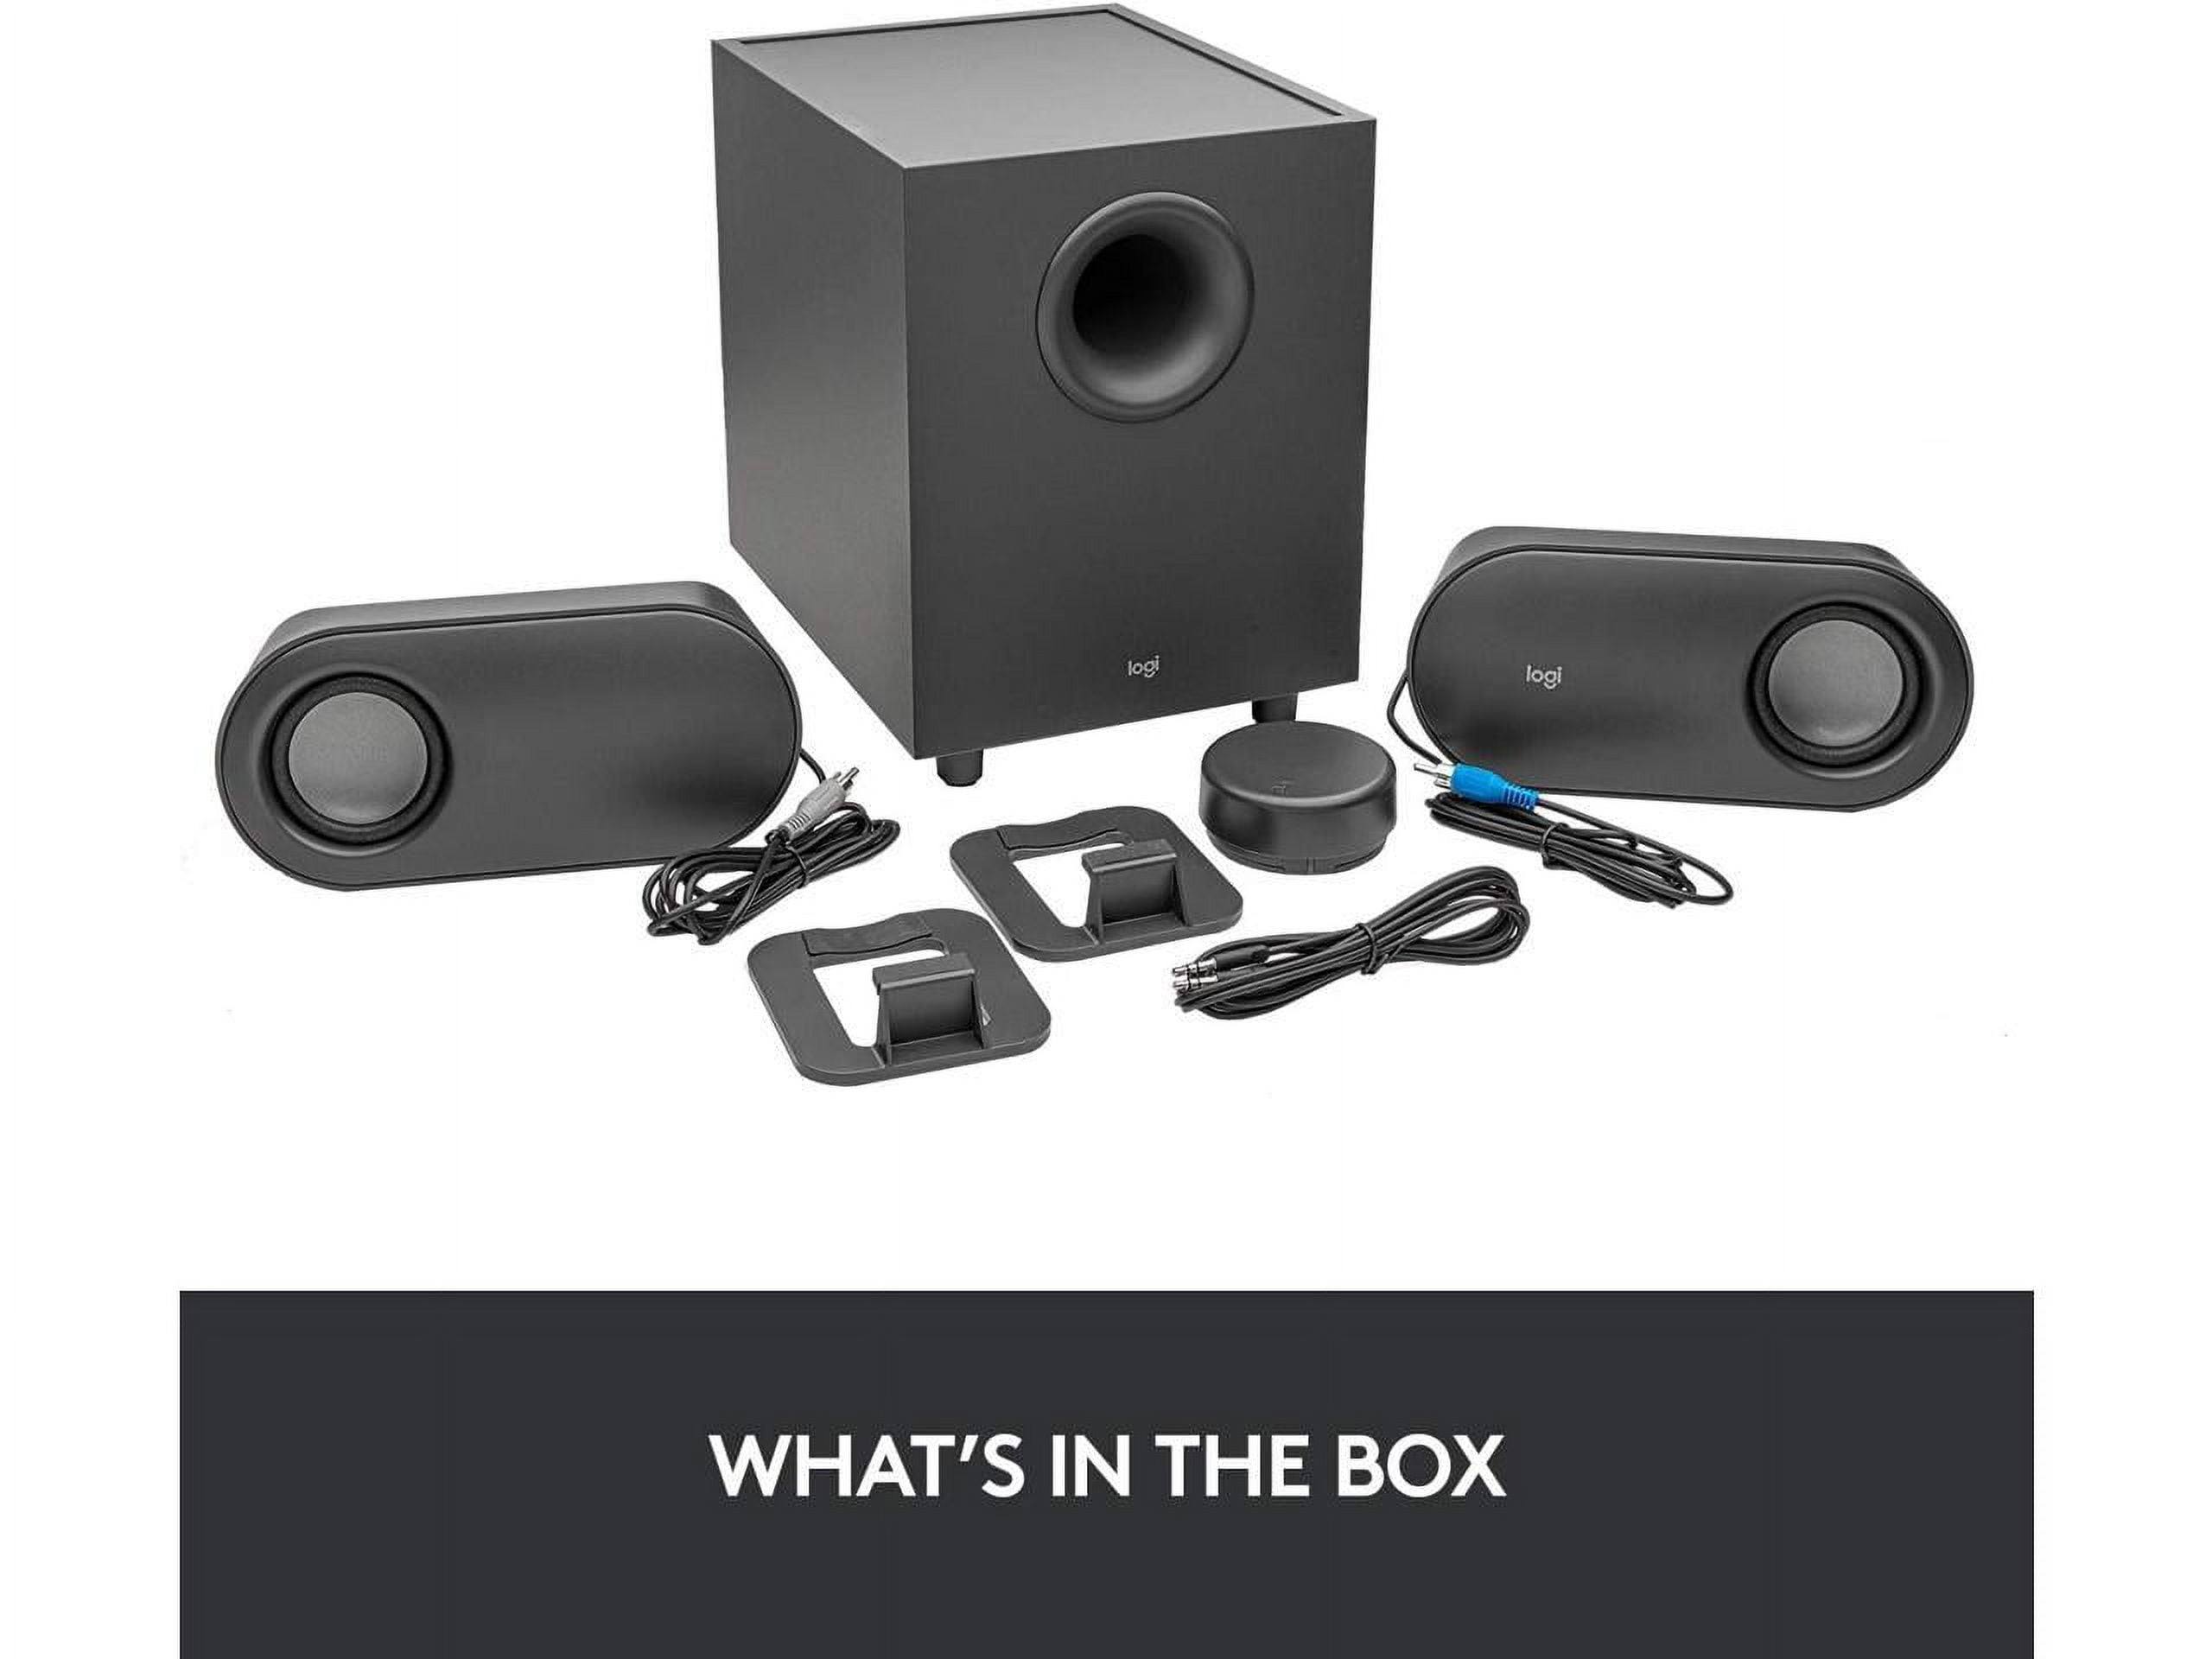 Logitech Z407 Computer Speakers with Subwoofer and Wireless Control, Immersive Sound, Premium Audio Multiple Inputs, USB Speakers - Walmart.com